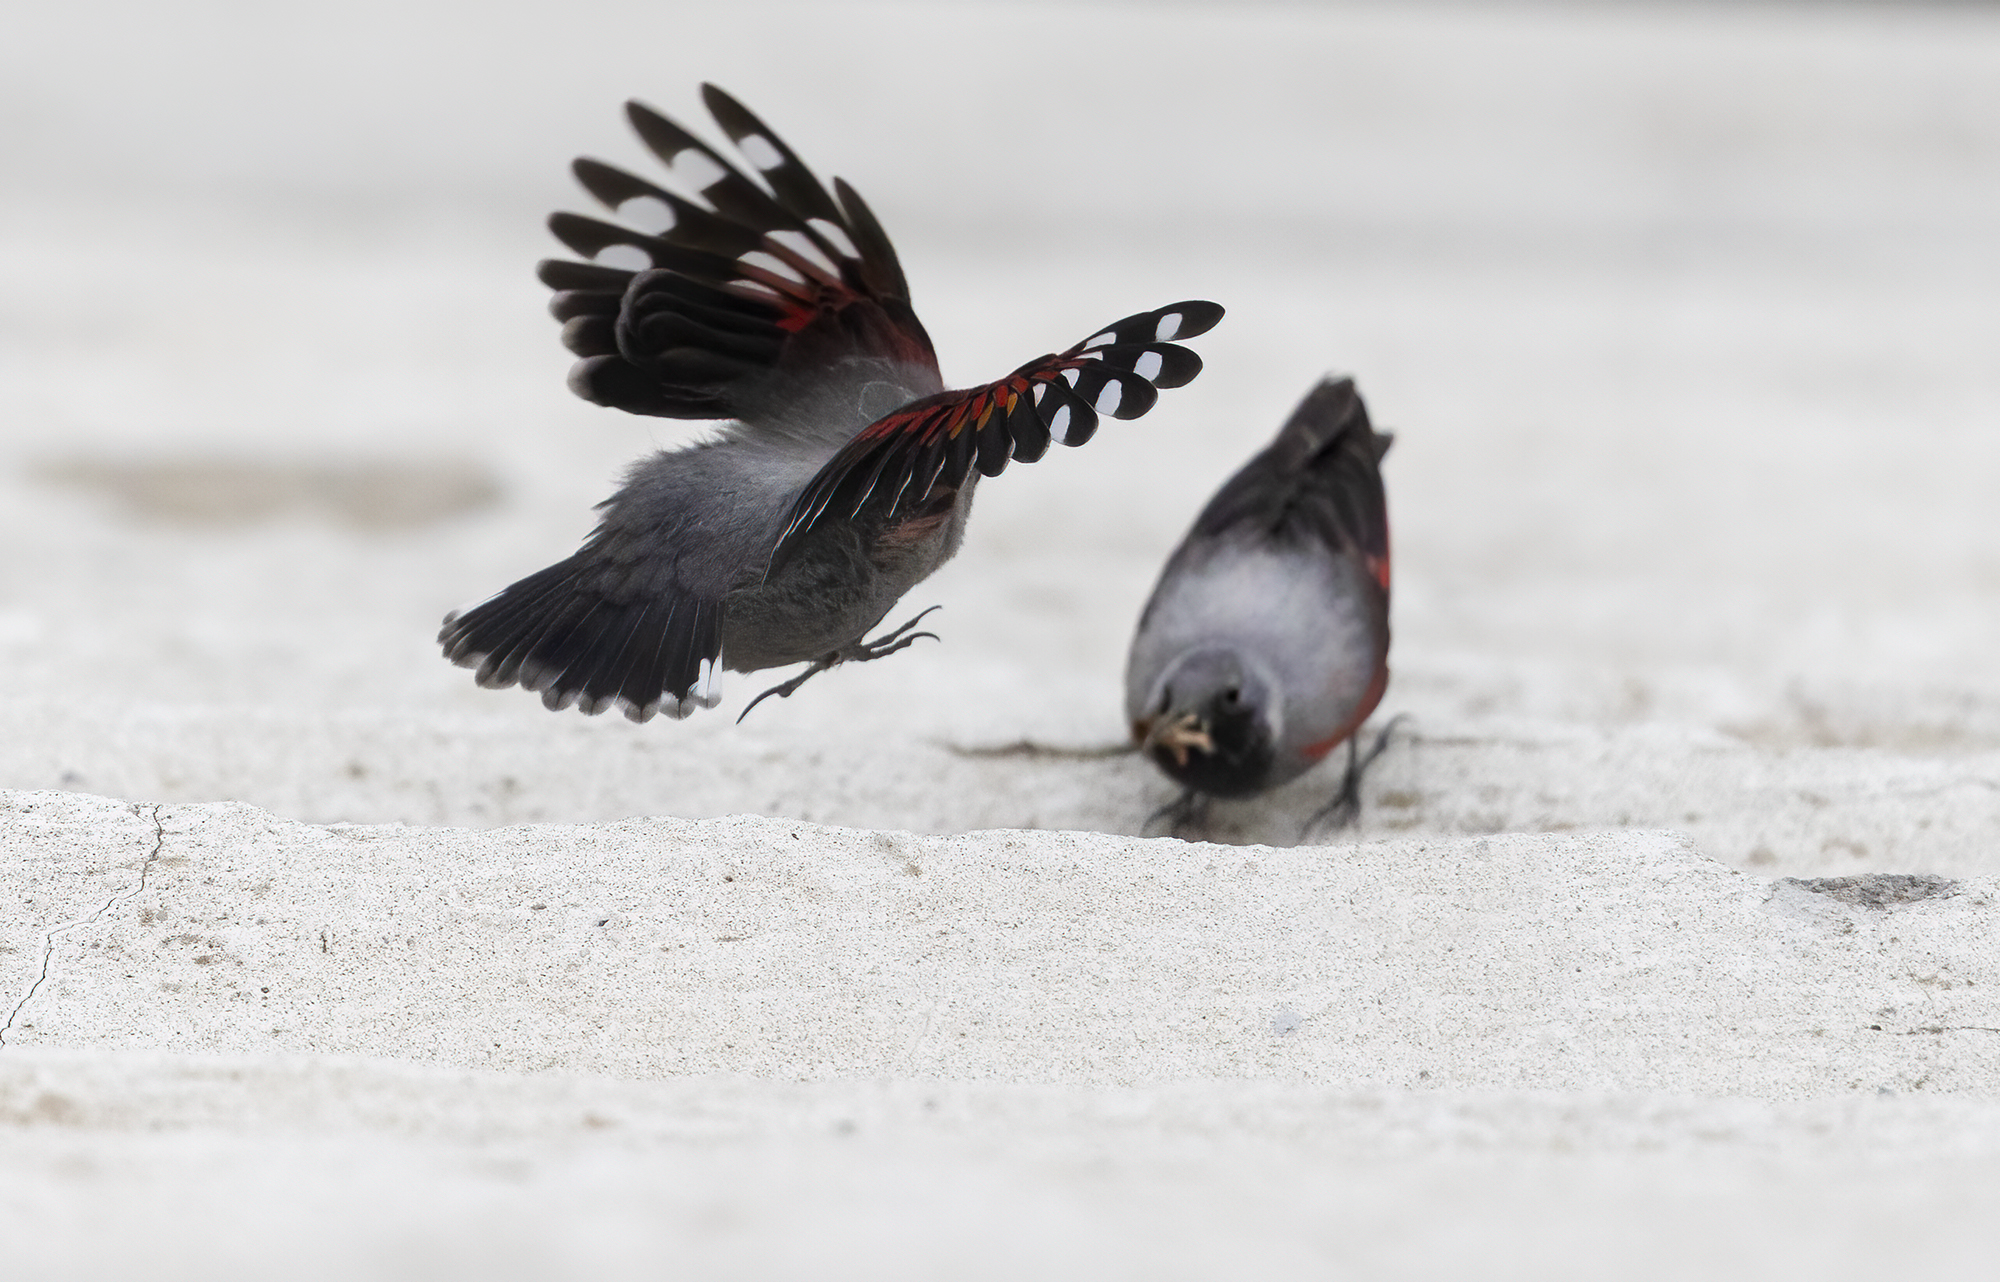 Flying to daddy, wallcreeper...